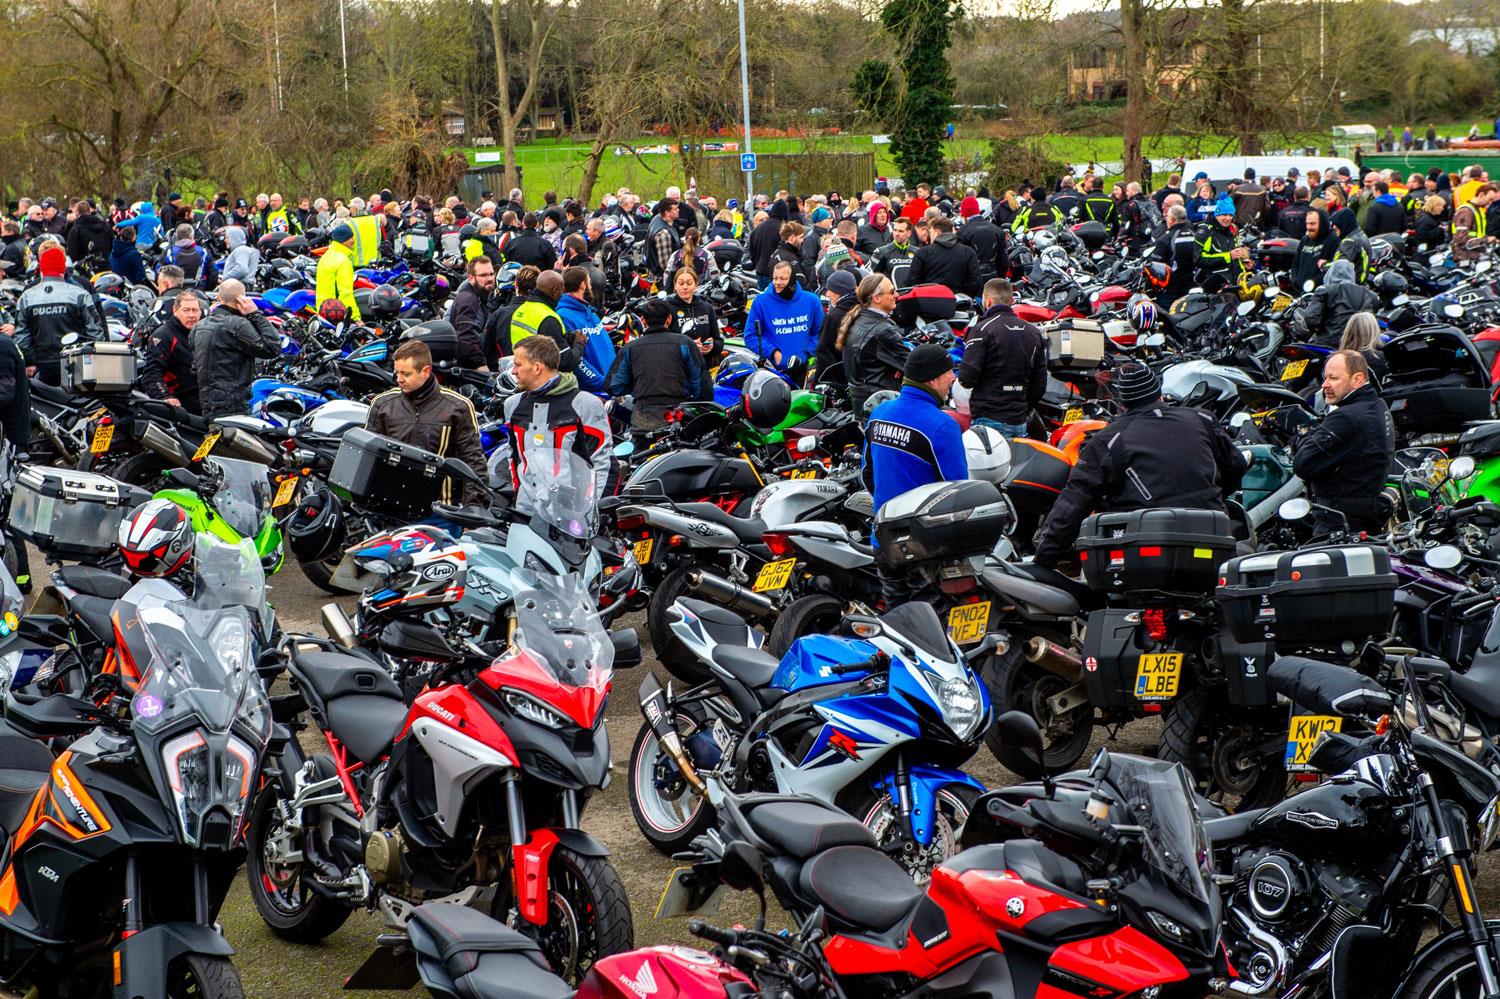 Over 800 bikers attend Northants Chilly Willy charity ride